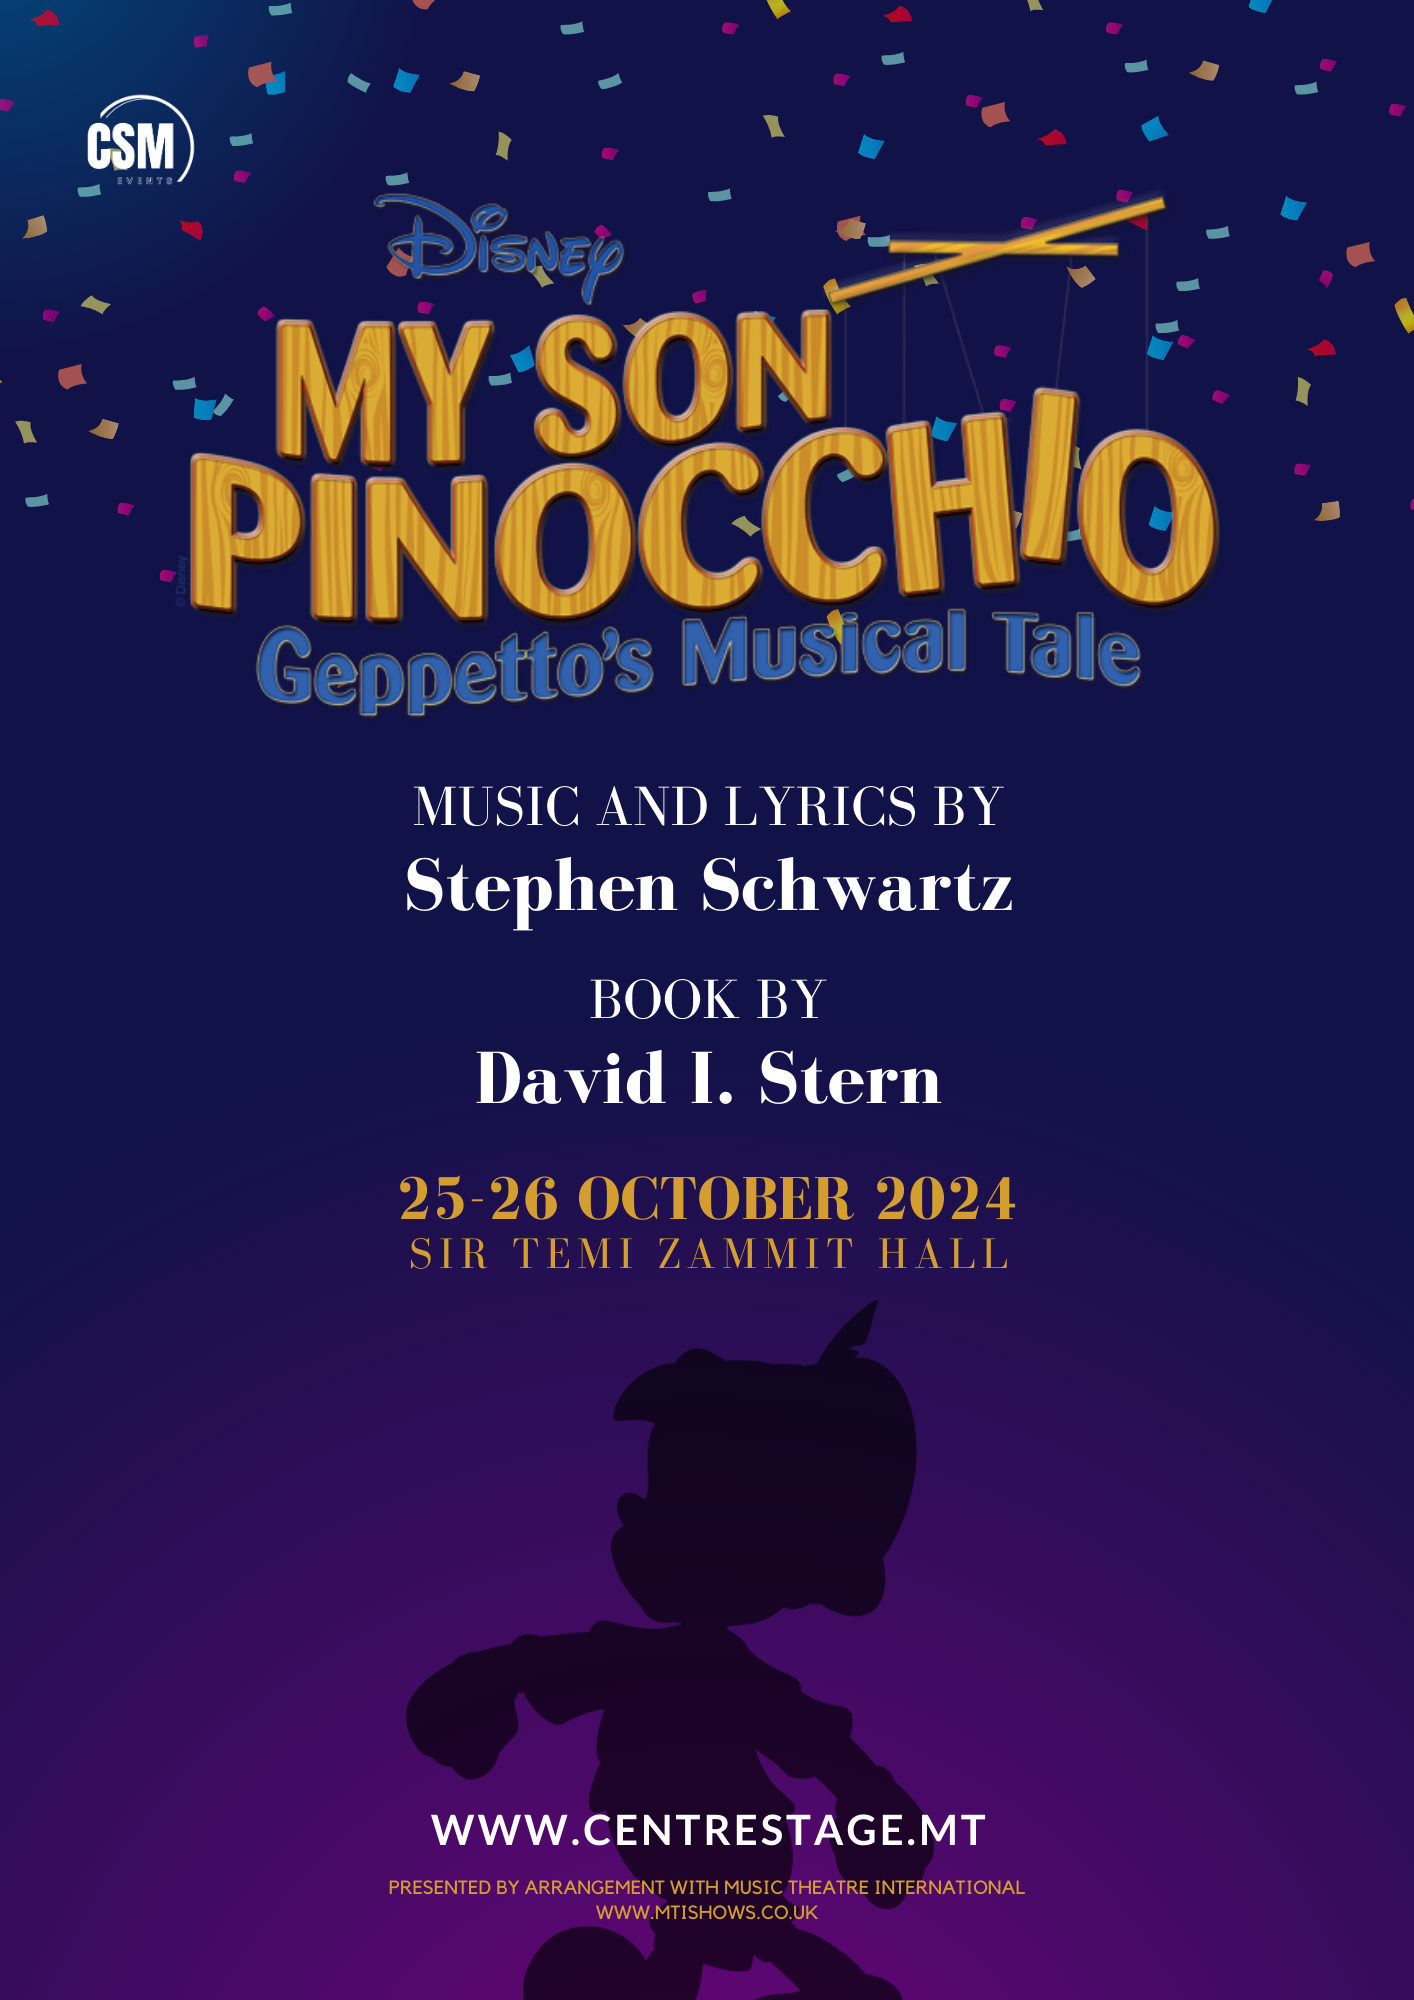 My Son Pinocchio - Geppetto's Musical Tale